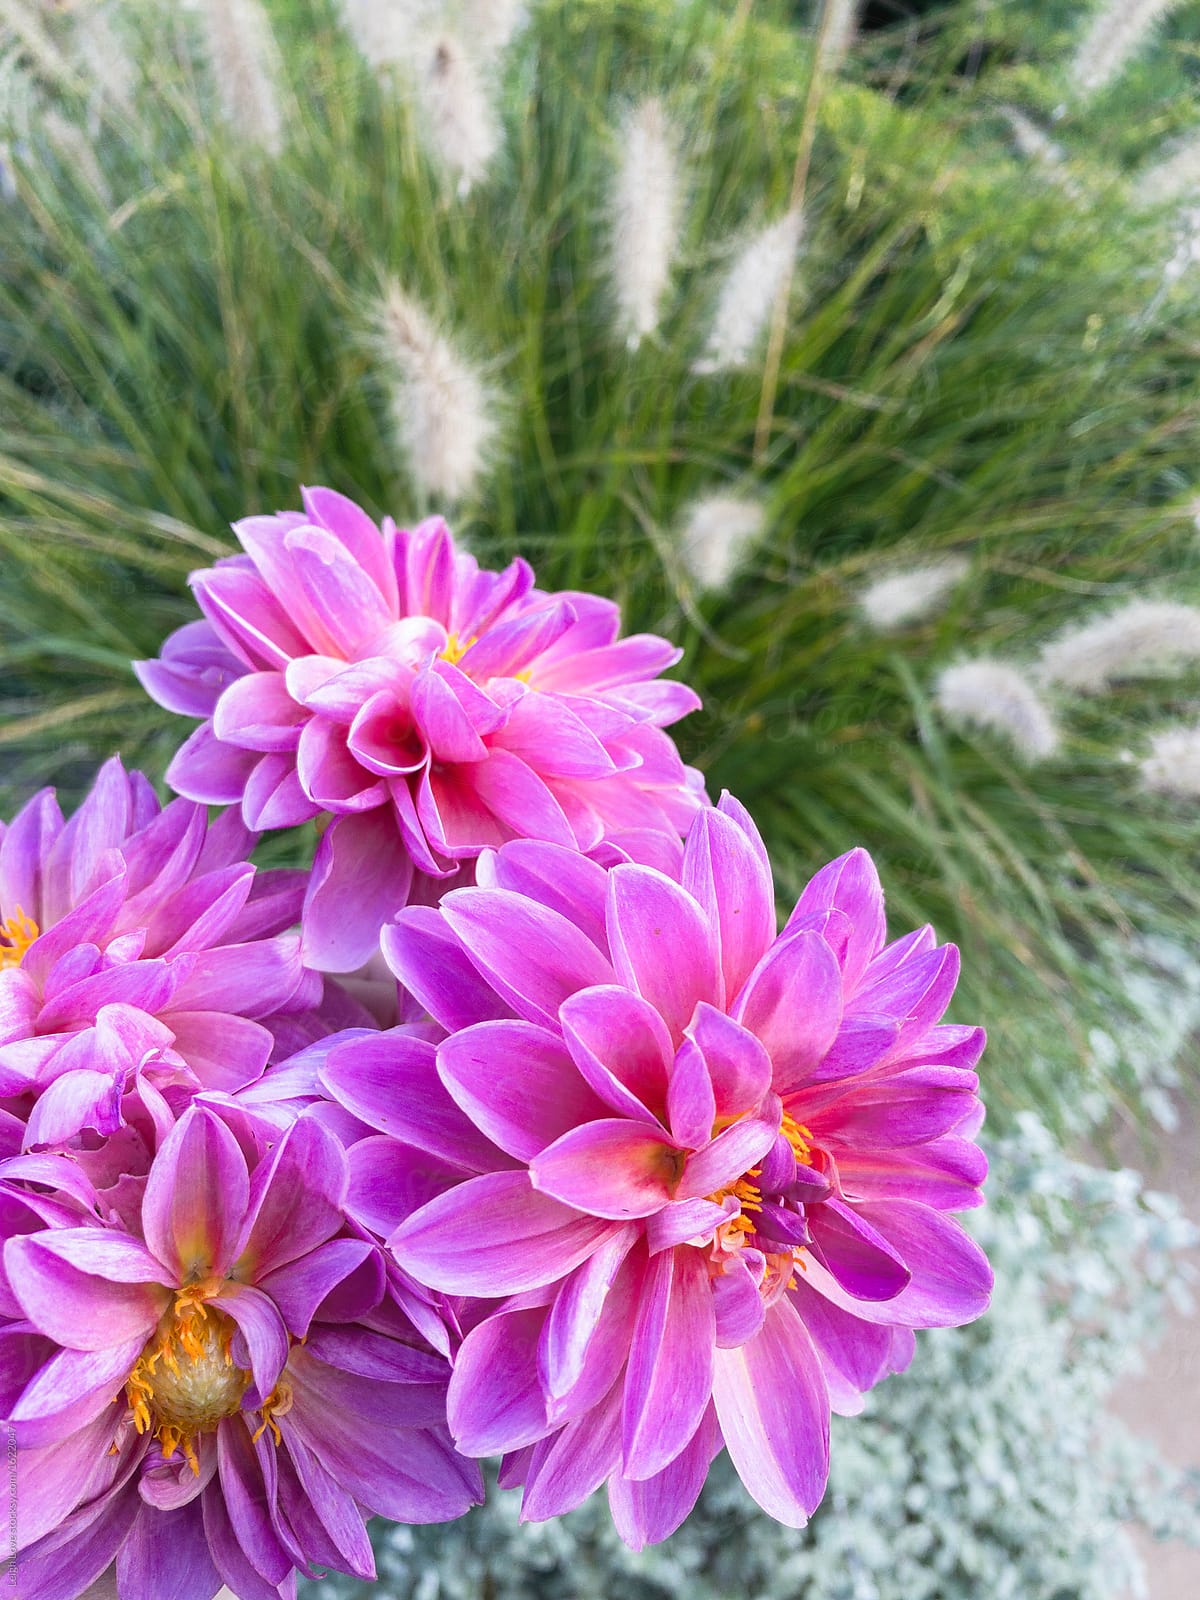 Pink Dahlias Mixed with A Grass With Fuzzy Plumes